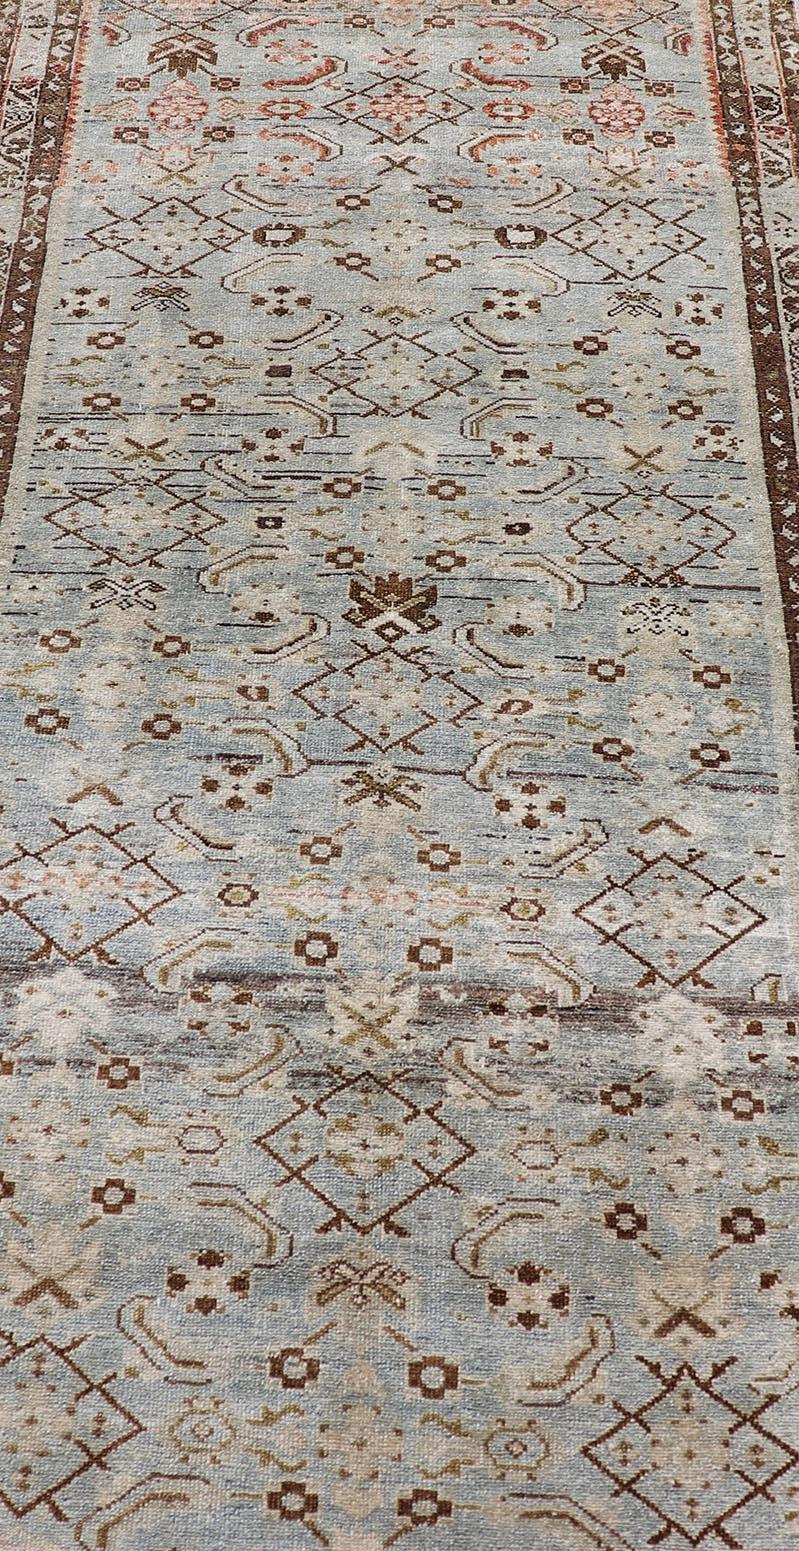 Wool Antique Hand-Knotted Persian Hamadan Runner with All-Over Tribal Design